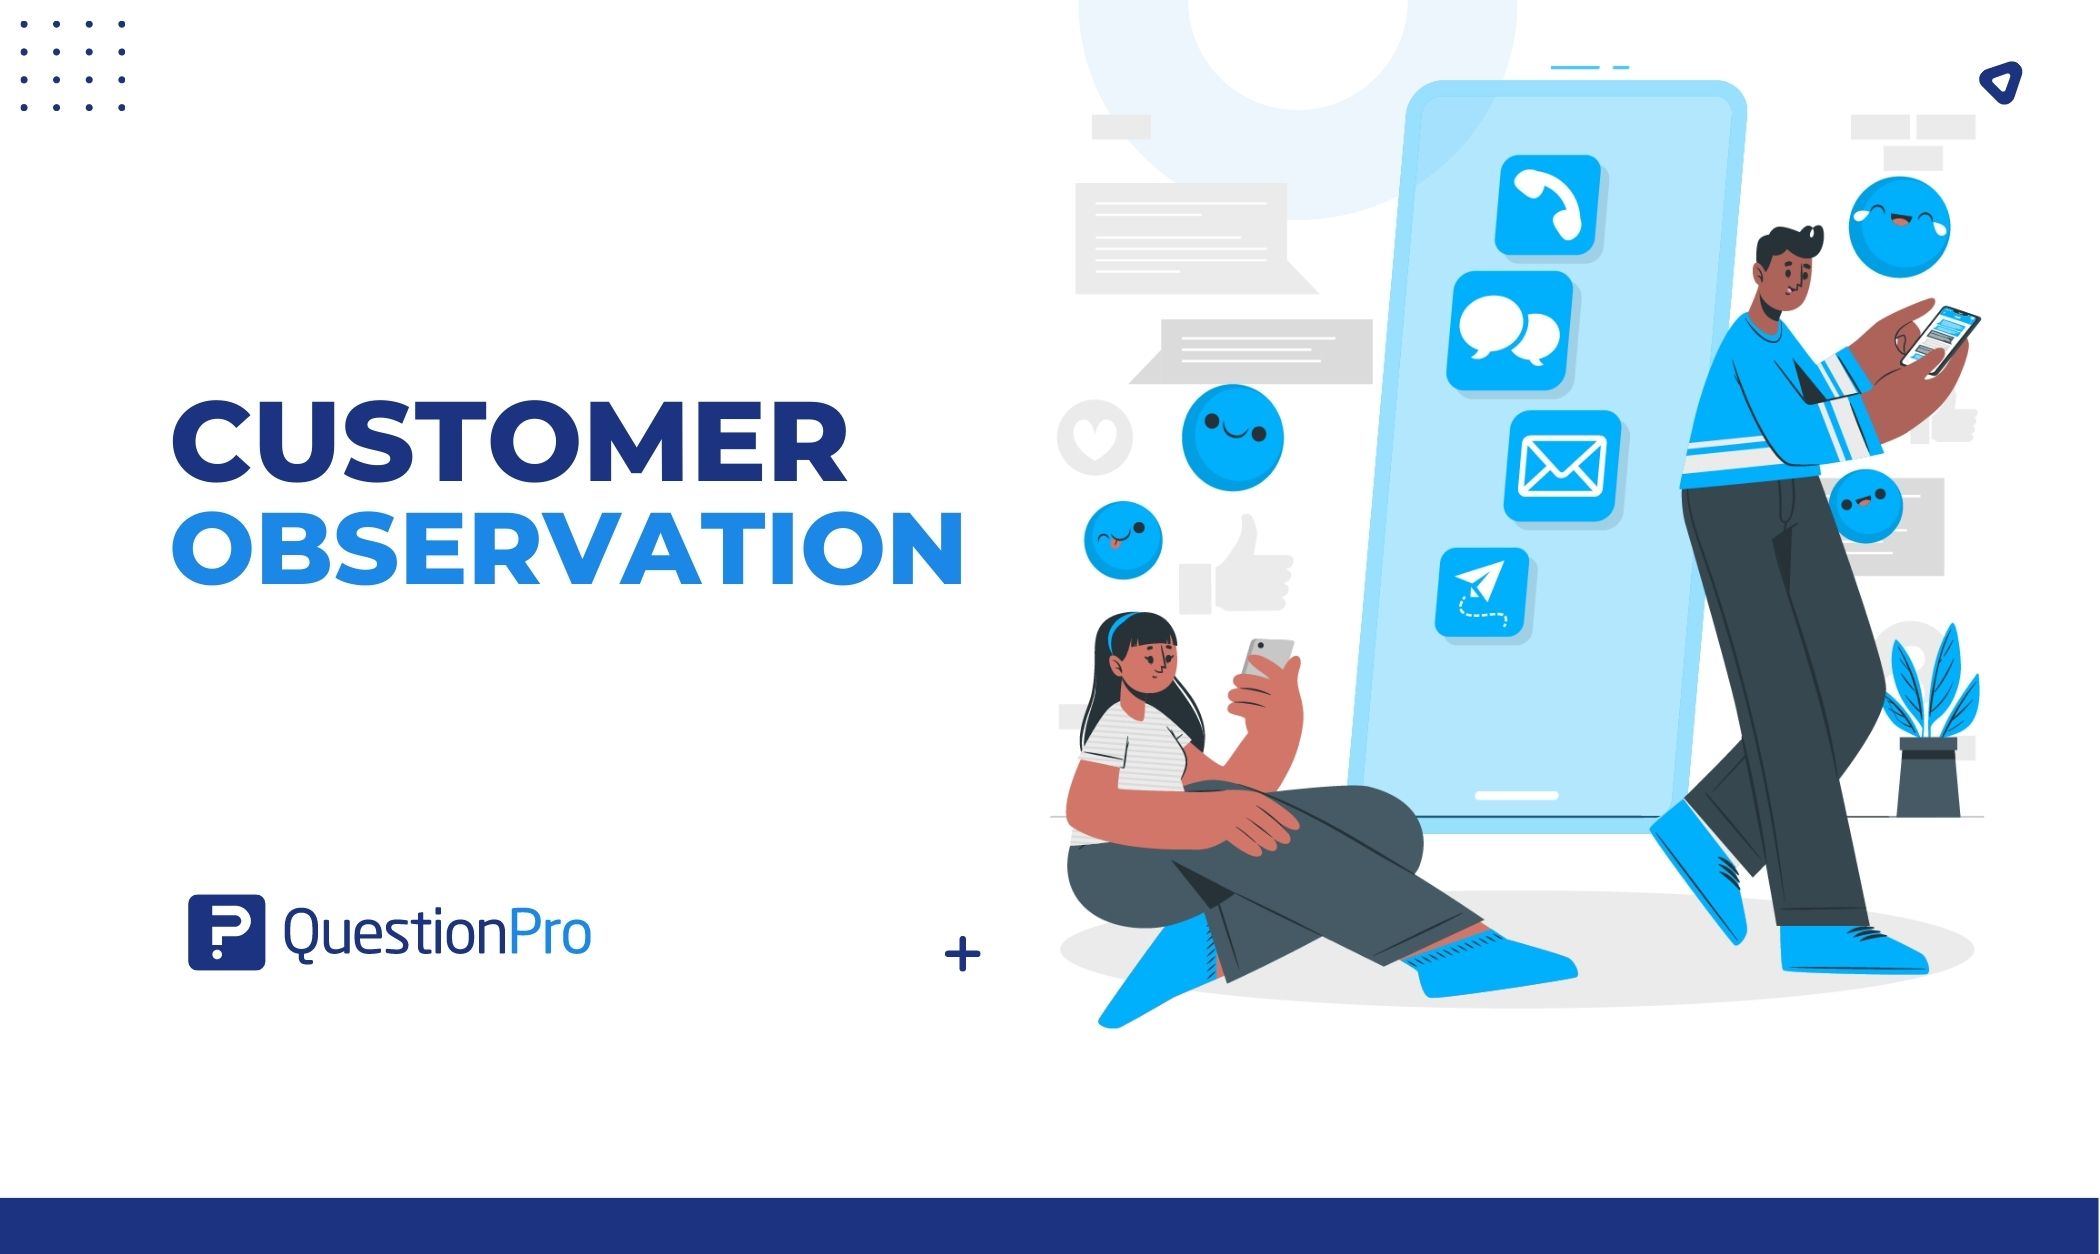 Customer observation is popular for tracking what customers do. Observations help you to find things that your customers do unconsciously.